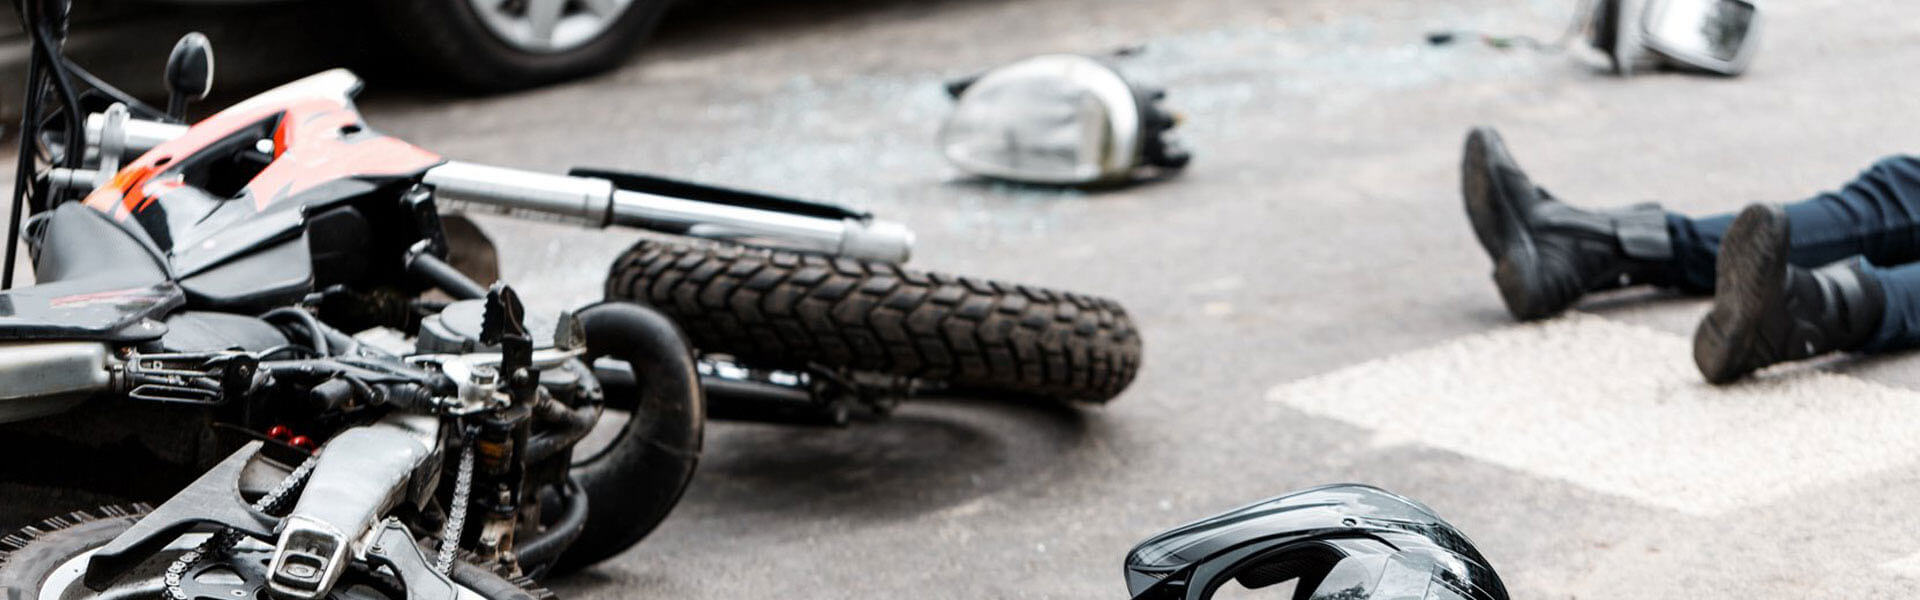 Piedmont SC Motorcycle Accident Lawyer